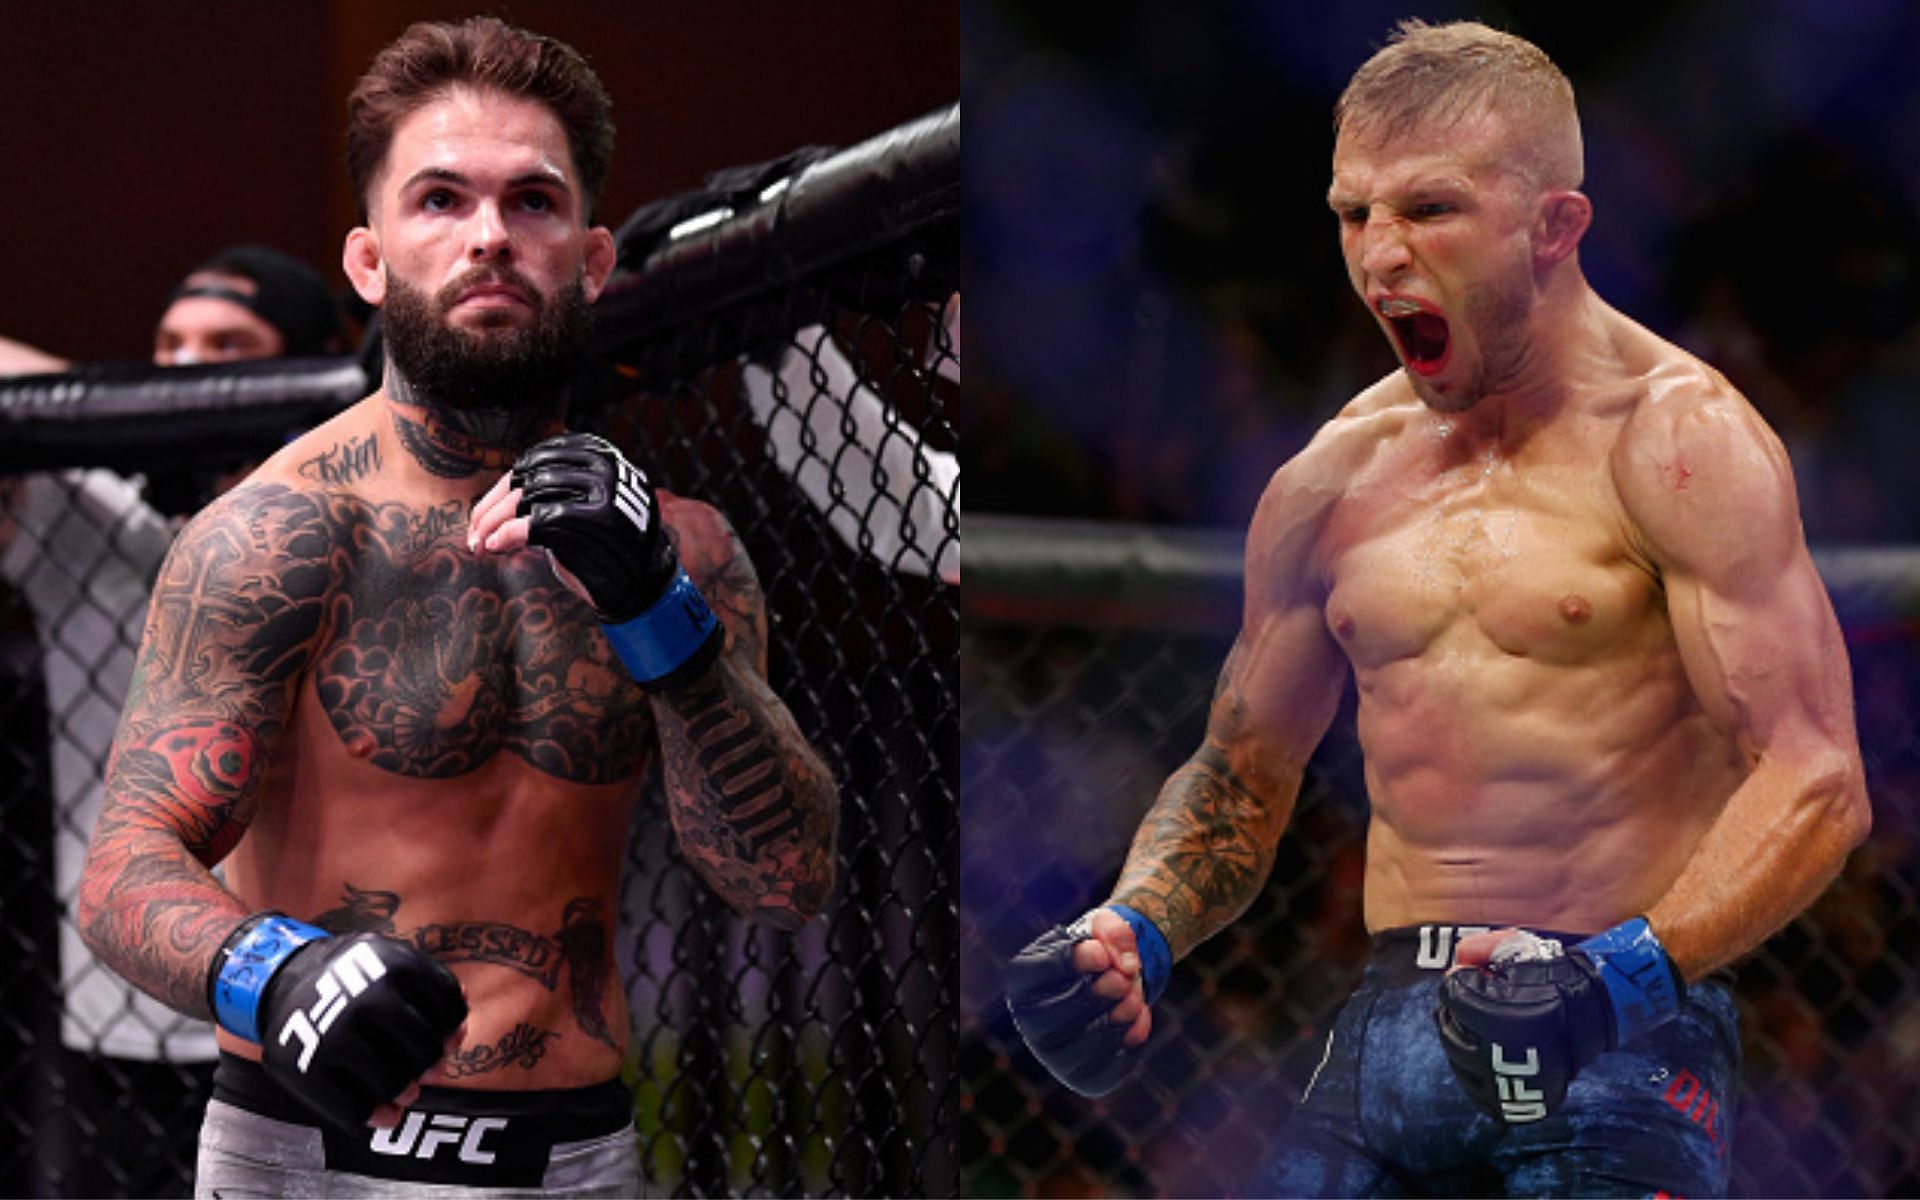 Cody Garbrandt (left) and T.J. Dillashaw (right)(Images via Getty)